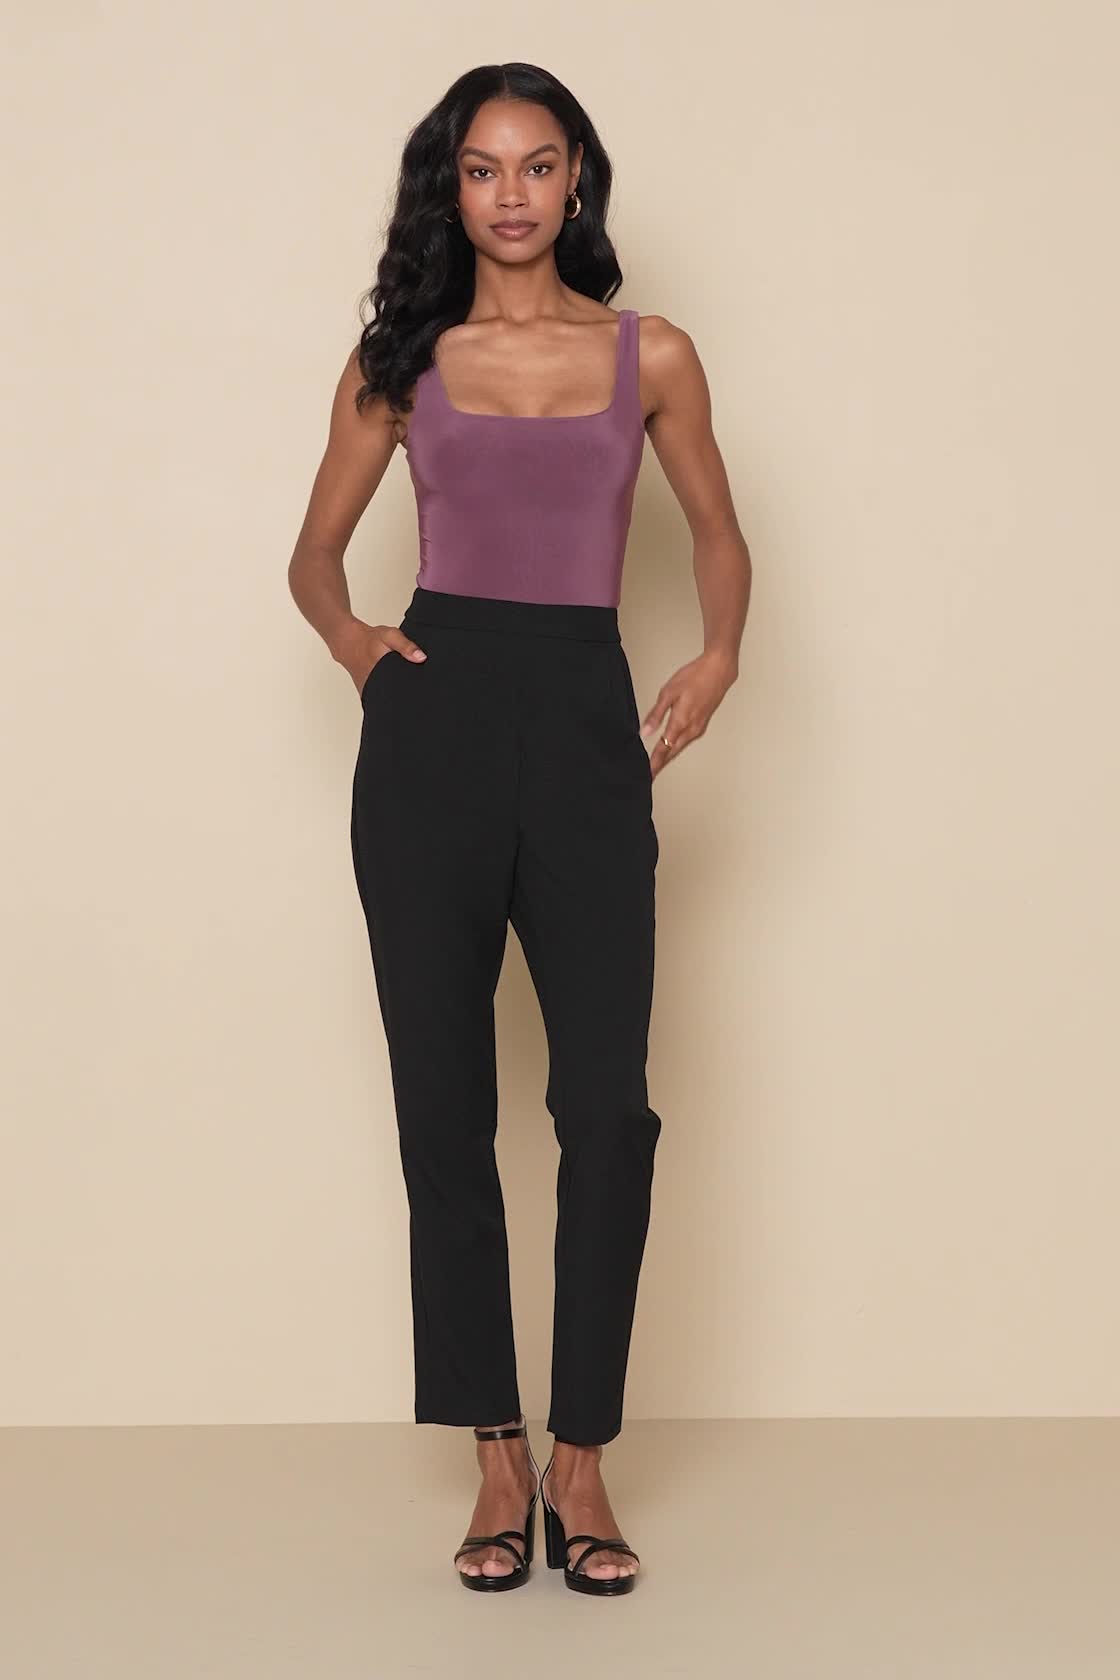 Chic Navy Blue Pants - High Waisted Pants - Blue Trousers - $37.00 - Lulus